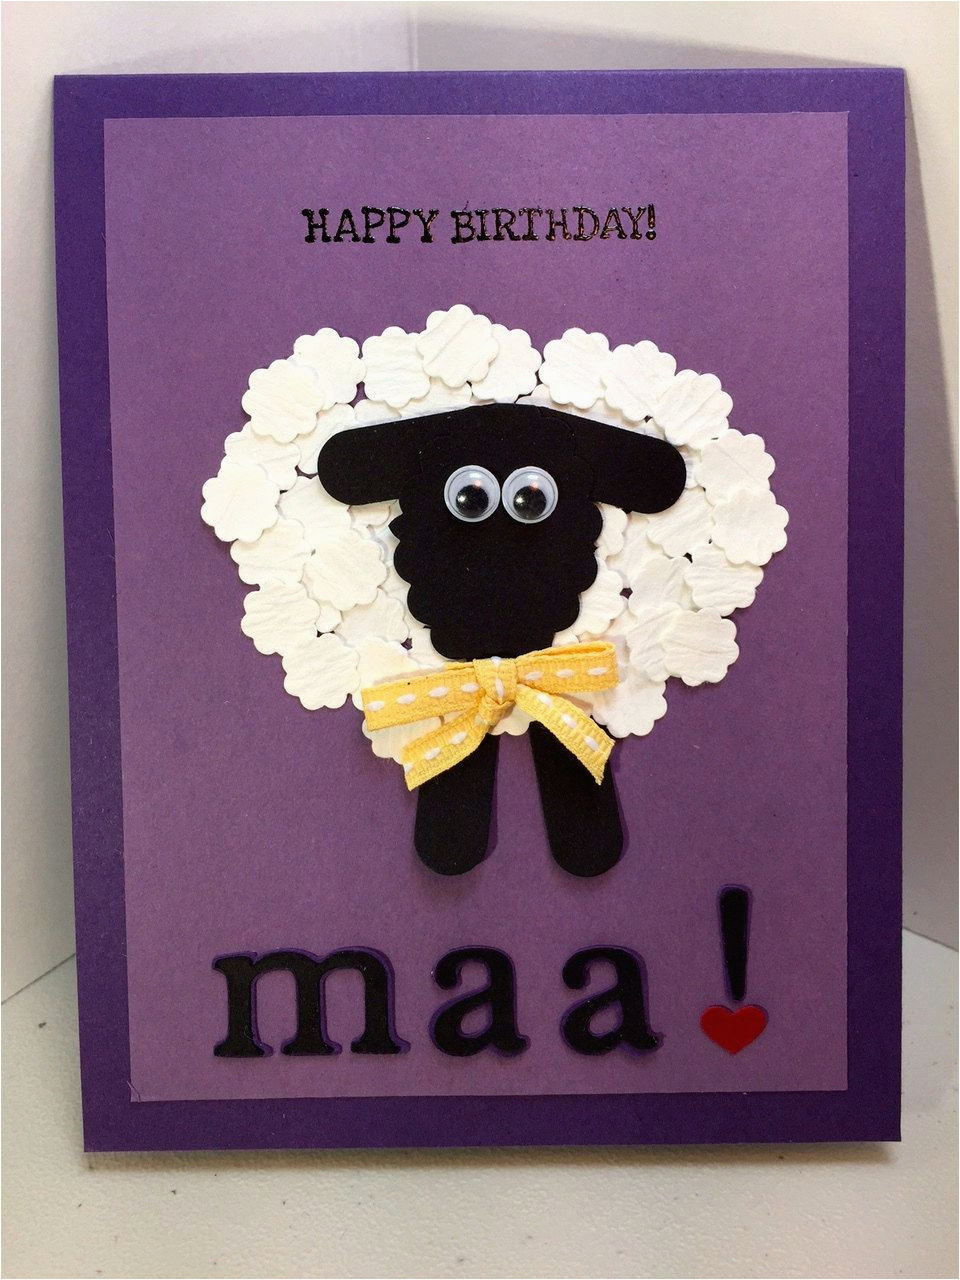 Birthday Cards For Mom Ideas How To Make Creative Handmade Birthday Cards For Mom Mother Birthday